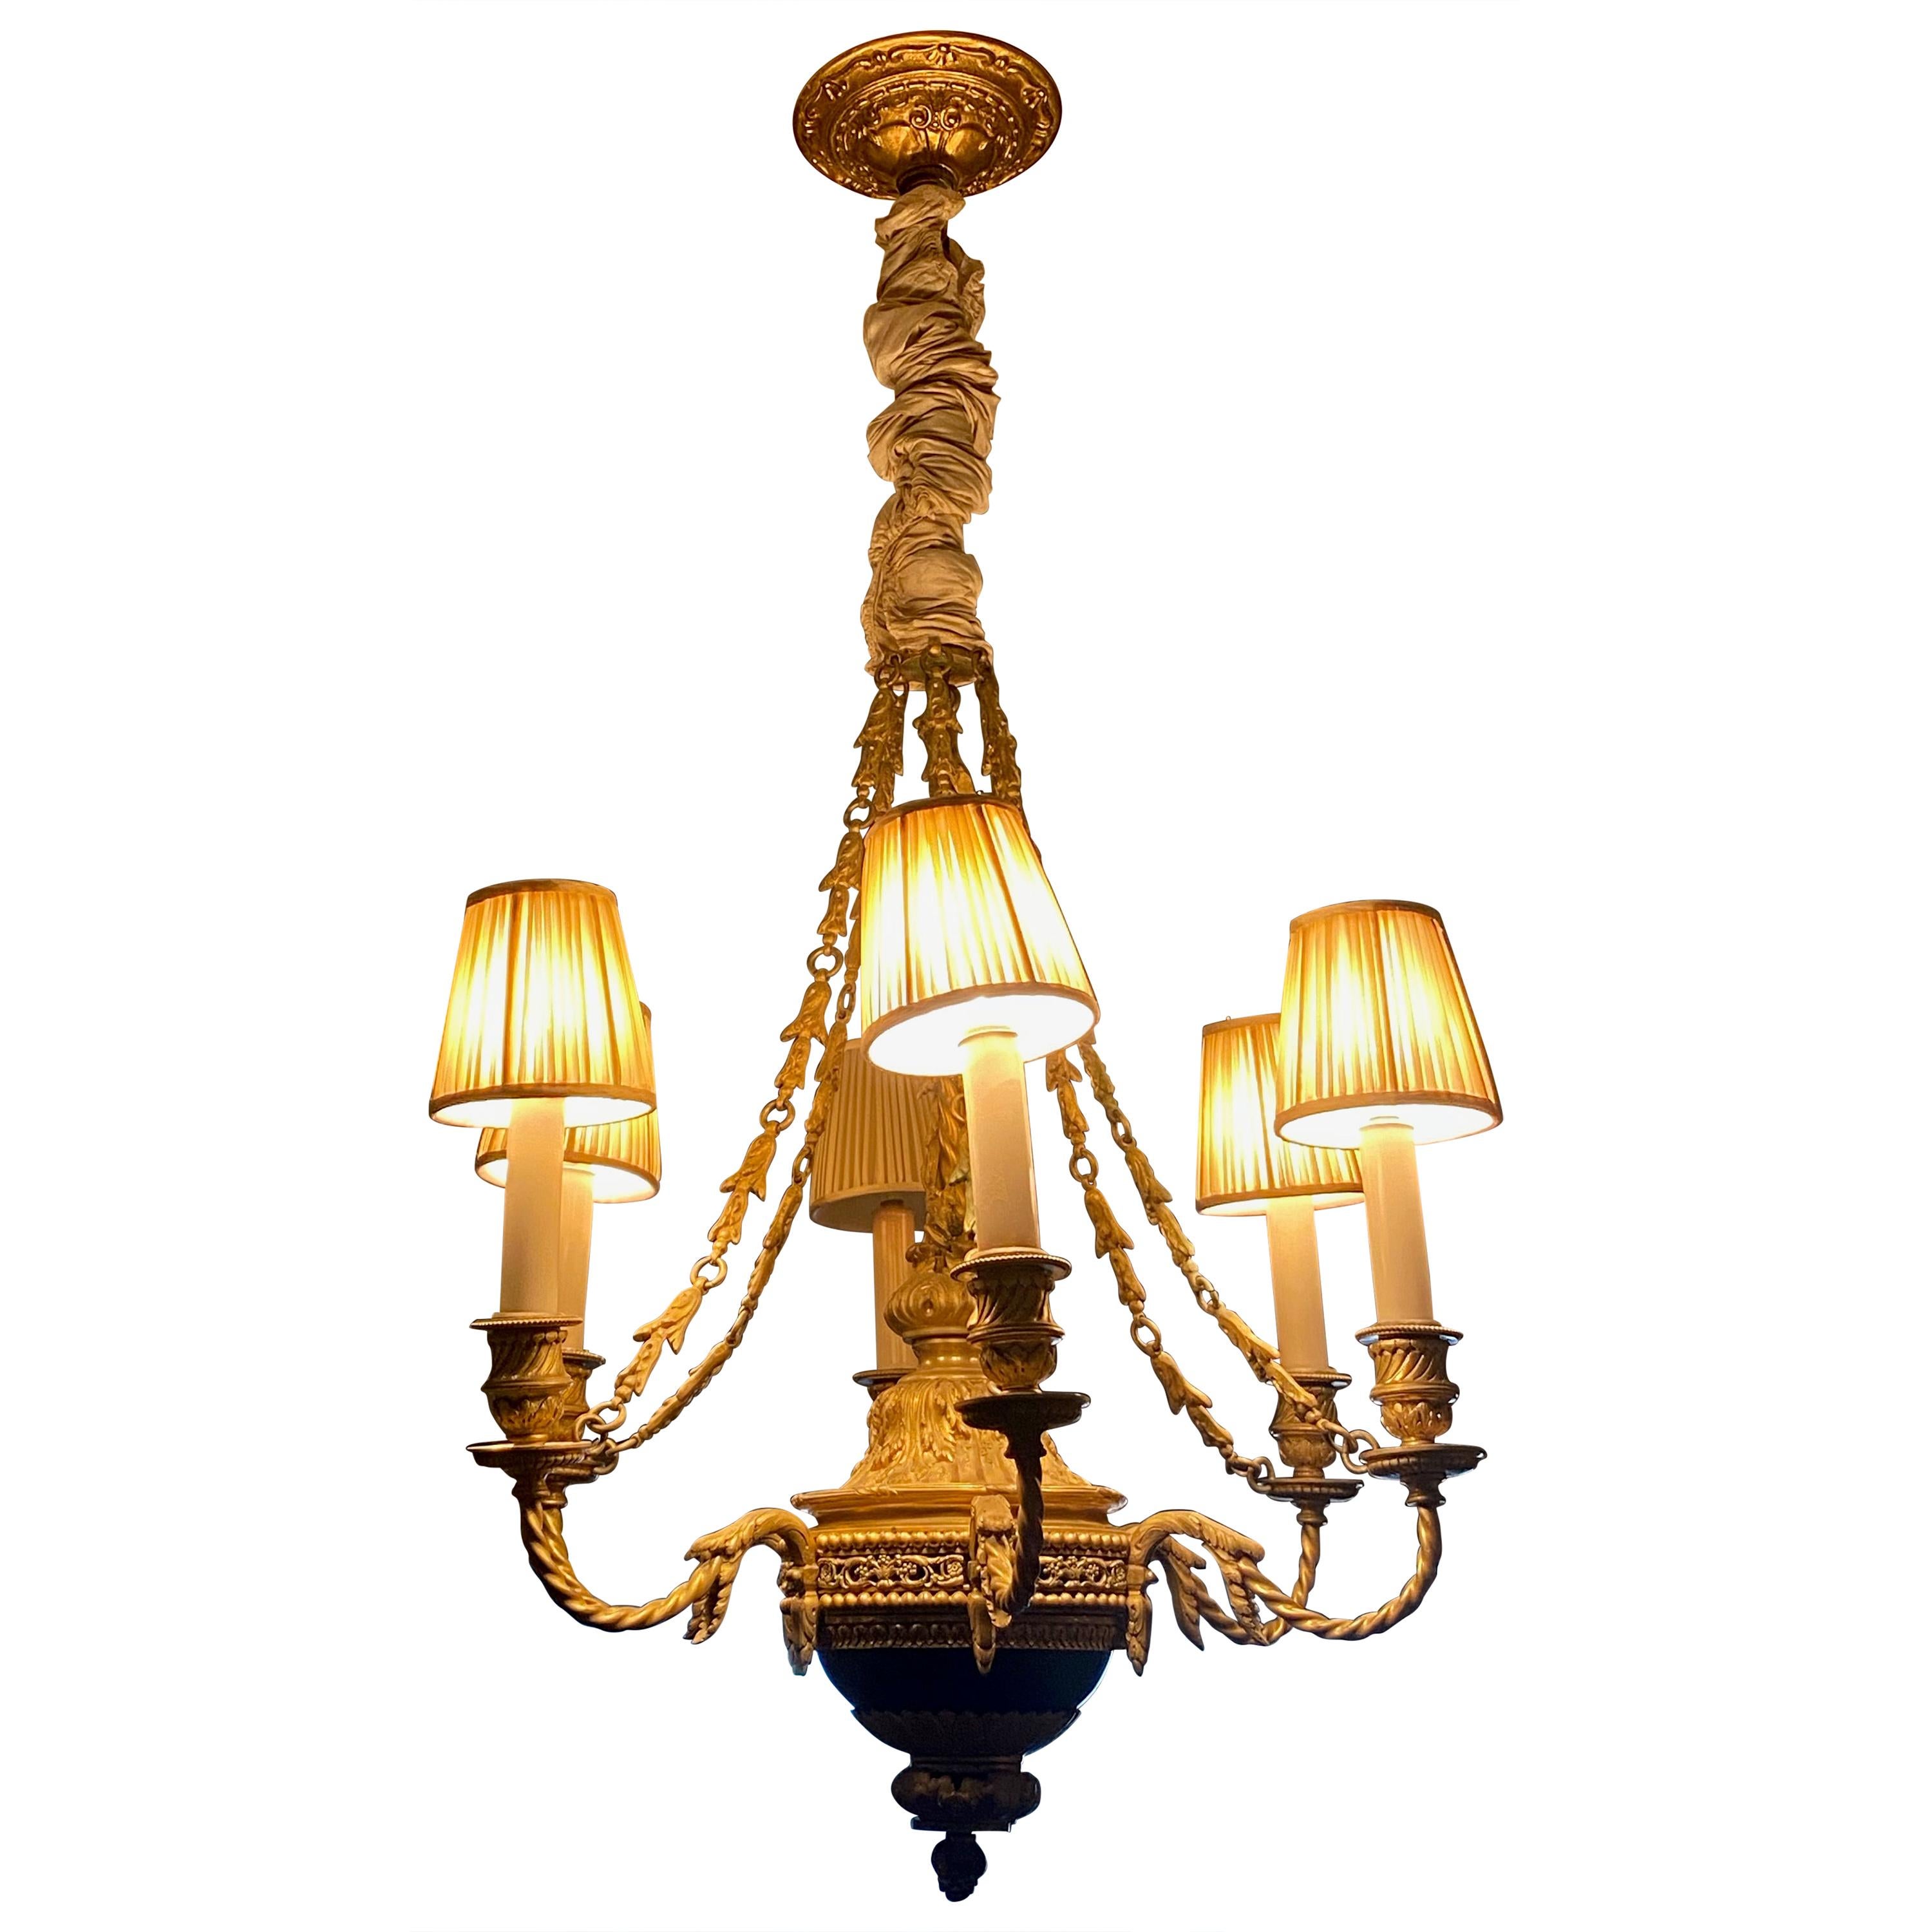 Chandelier with Six Lamps Attached, Classical Design